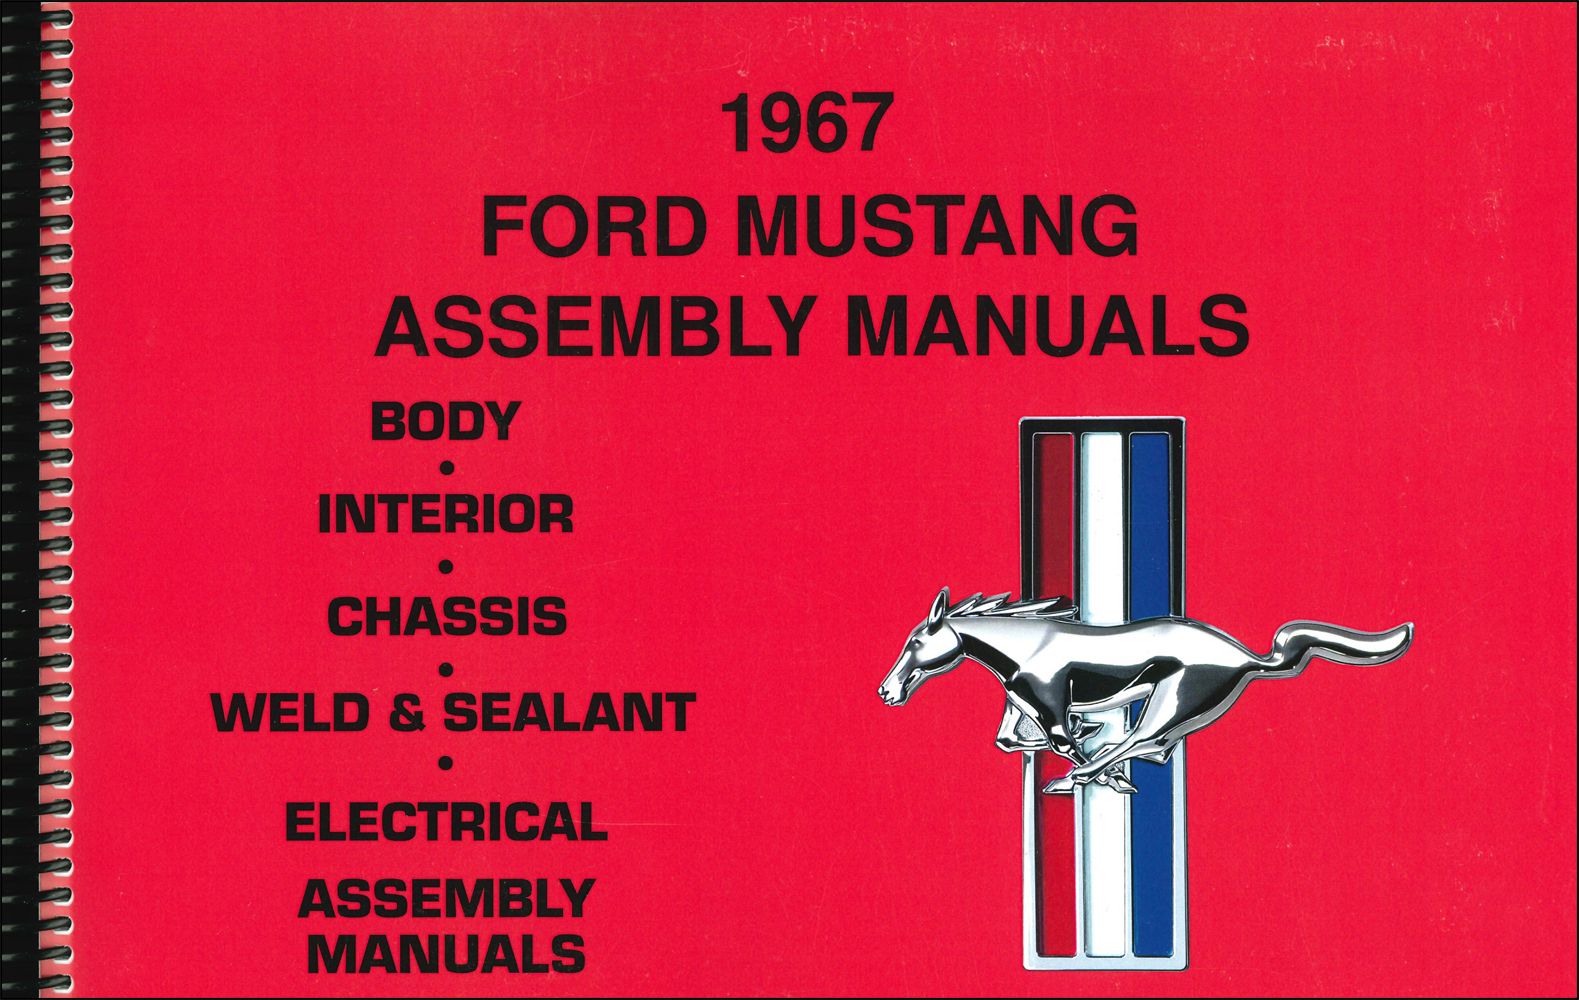 1967 Ford Mustang Assembly Manual Reprint set of 5 Books in 1 Volume